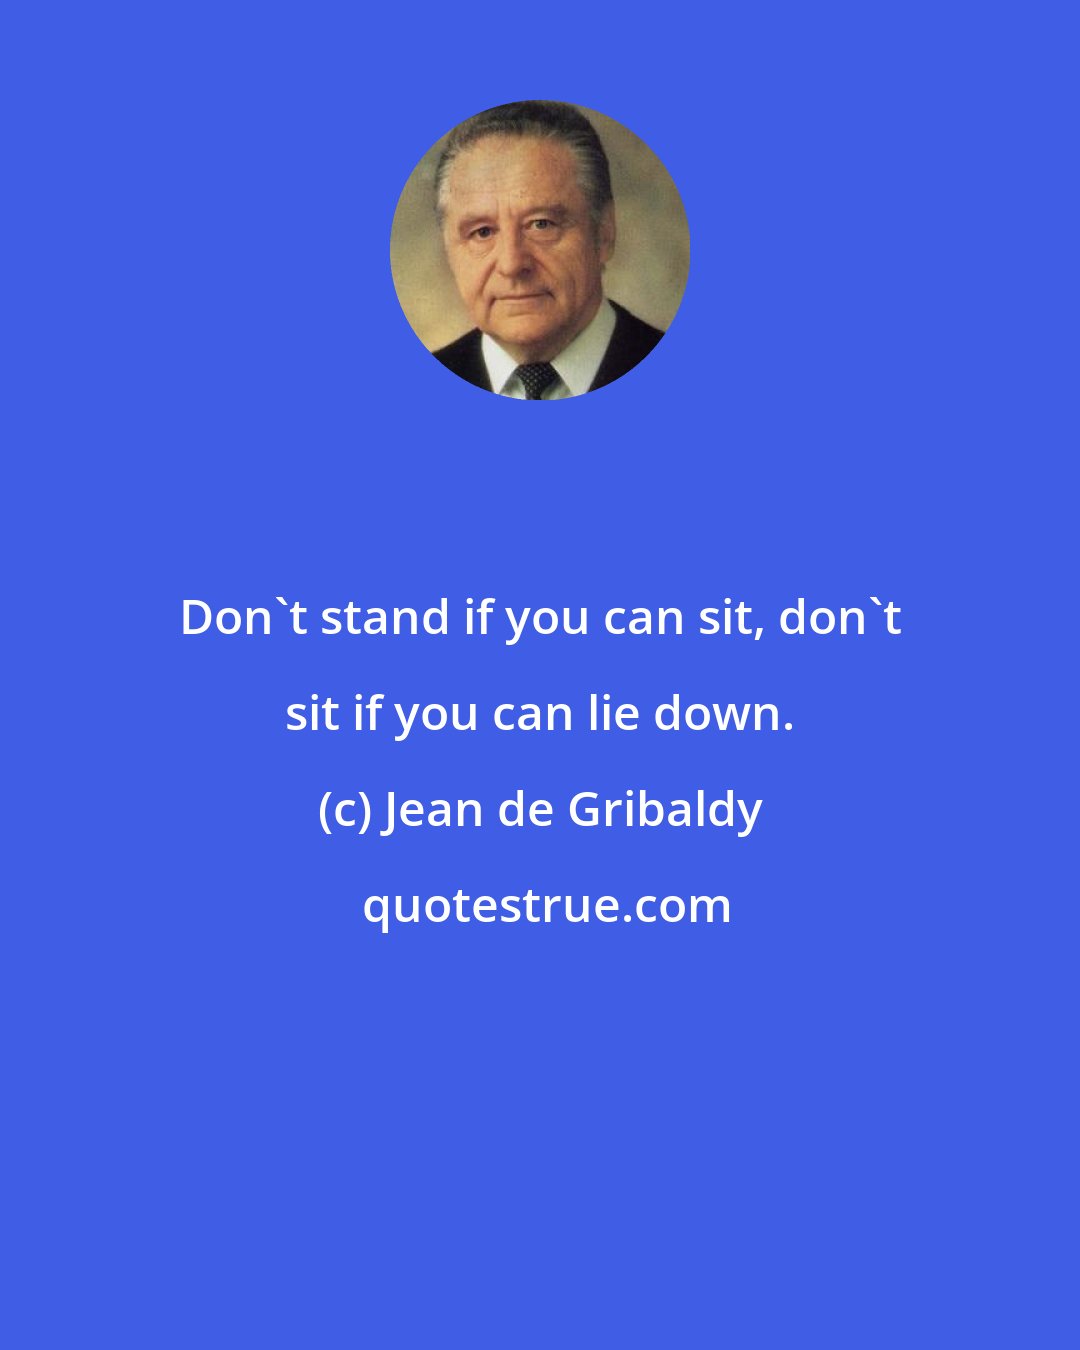 Jean de Gribaldy: Don't stand if you can sit, don't sit if you can lie down.